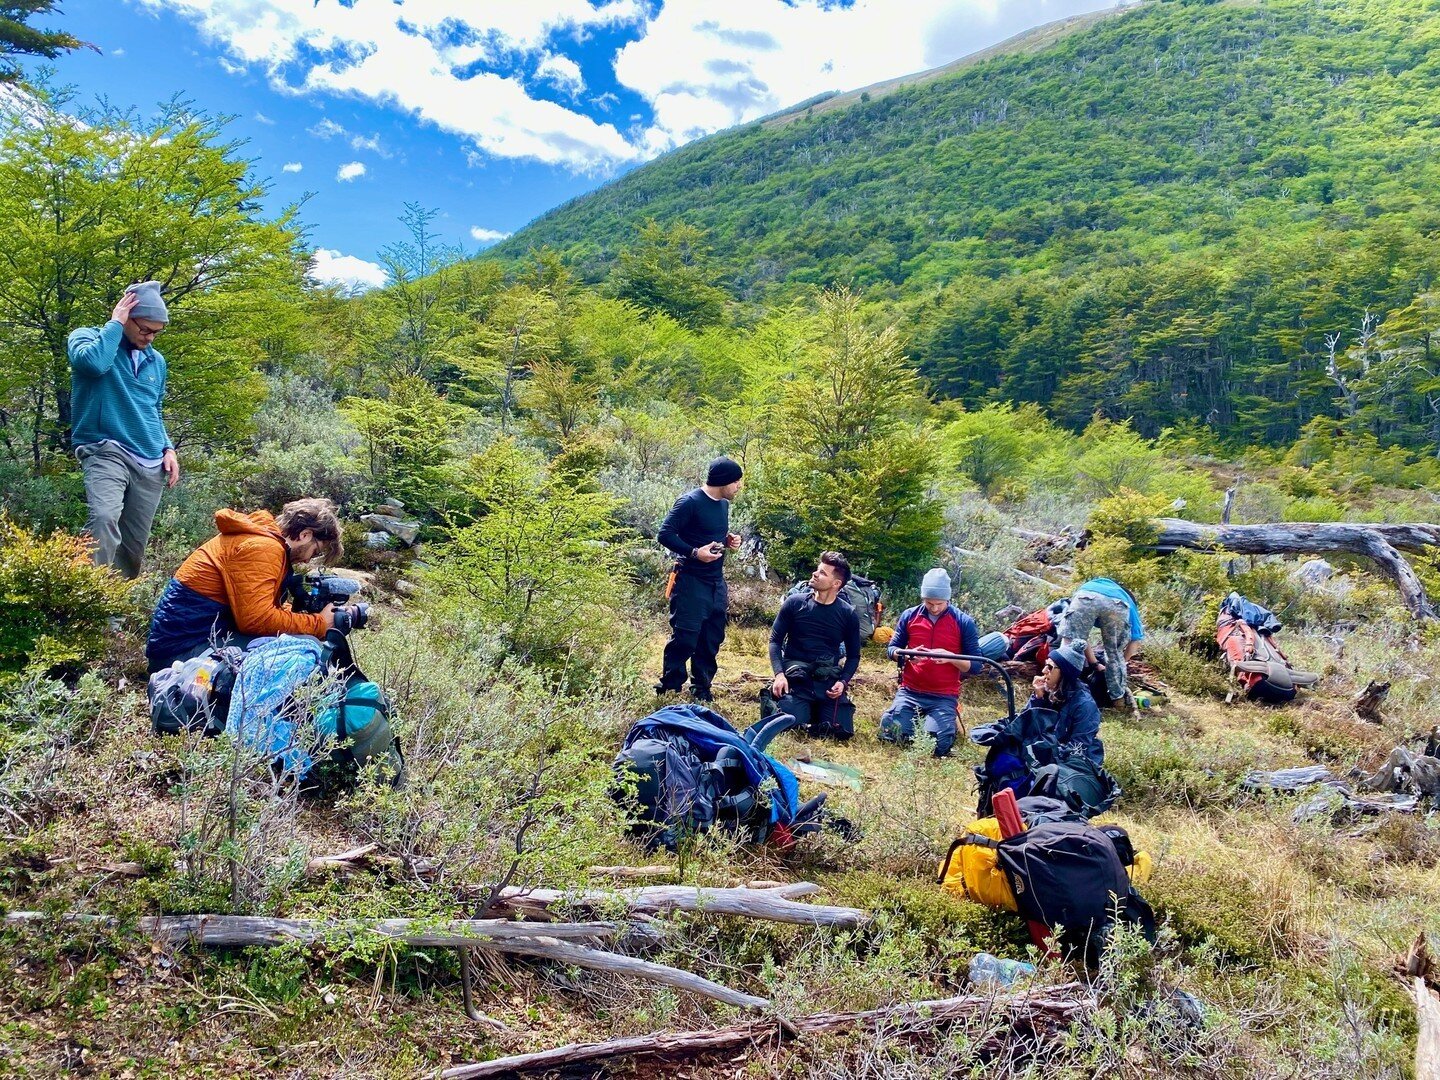 Outdoor adventures with the cast and crew, there's nothing better than a view like this 🏞
.
.
.
.
.
#intothewild #bestplacestogo #tinypeopleinbigplaces #welltravelled #suitcasetravels #bts #behindthescene #shortfilm #alltheworldsafilmset #jynxjunket